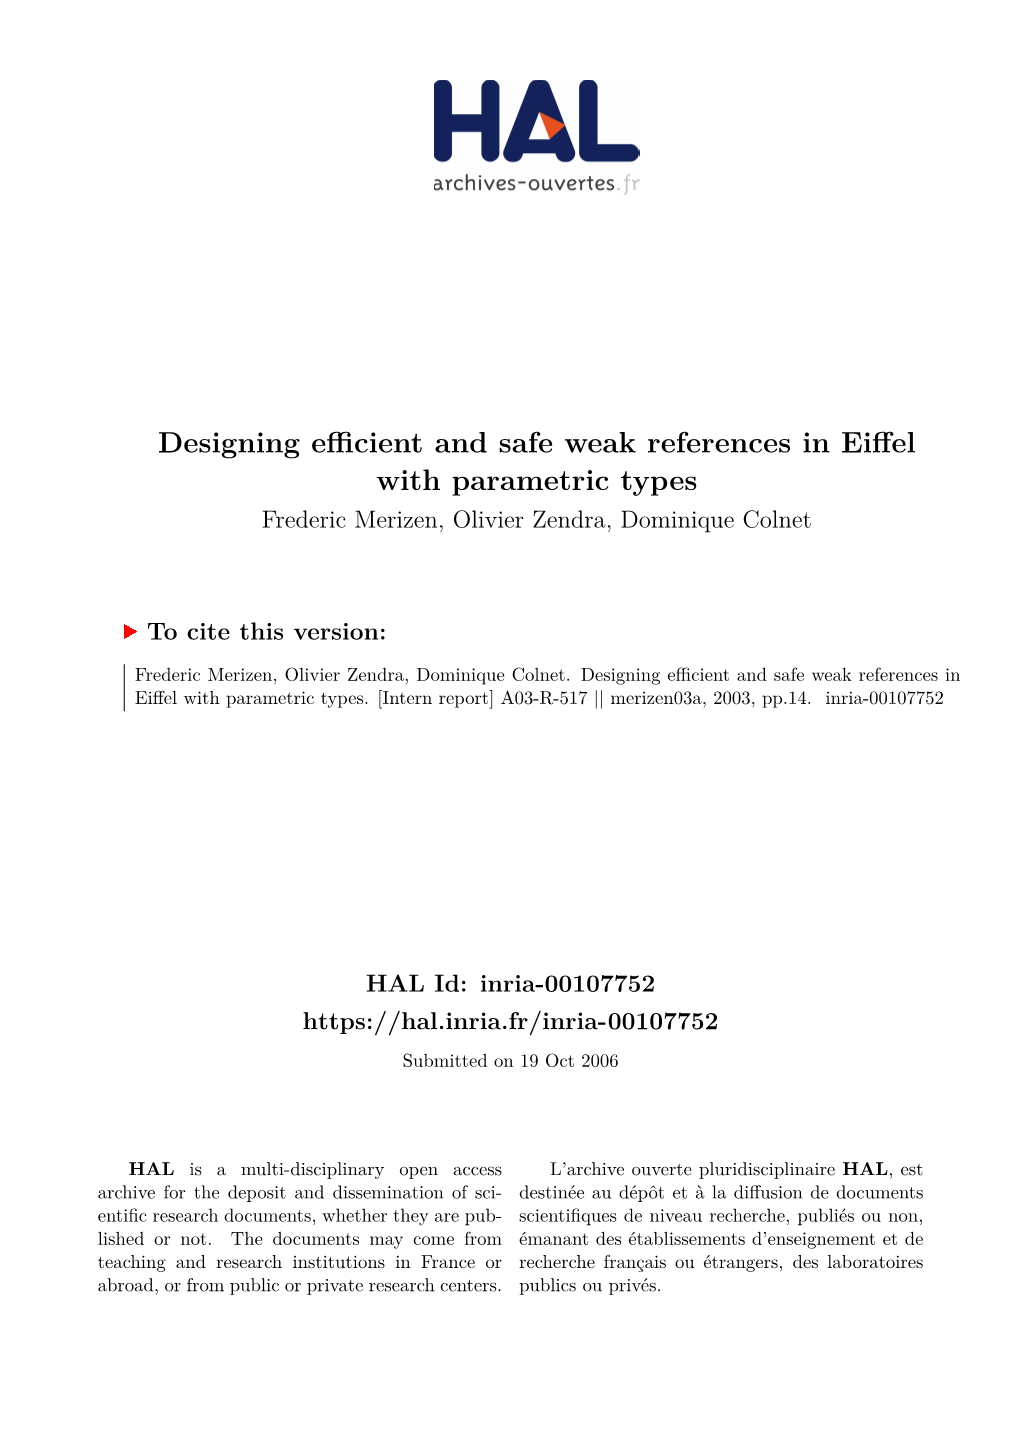 Designing Efficient and Safe Weak References in Eiffel with Parametric